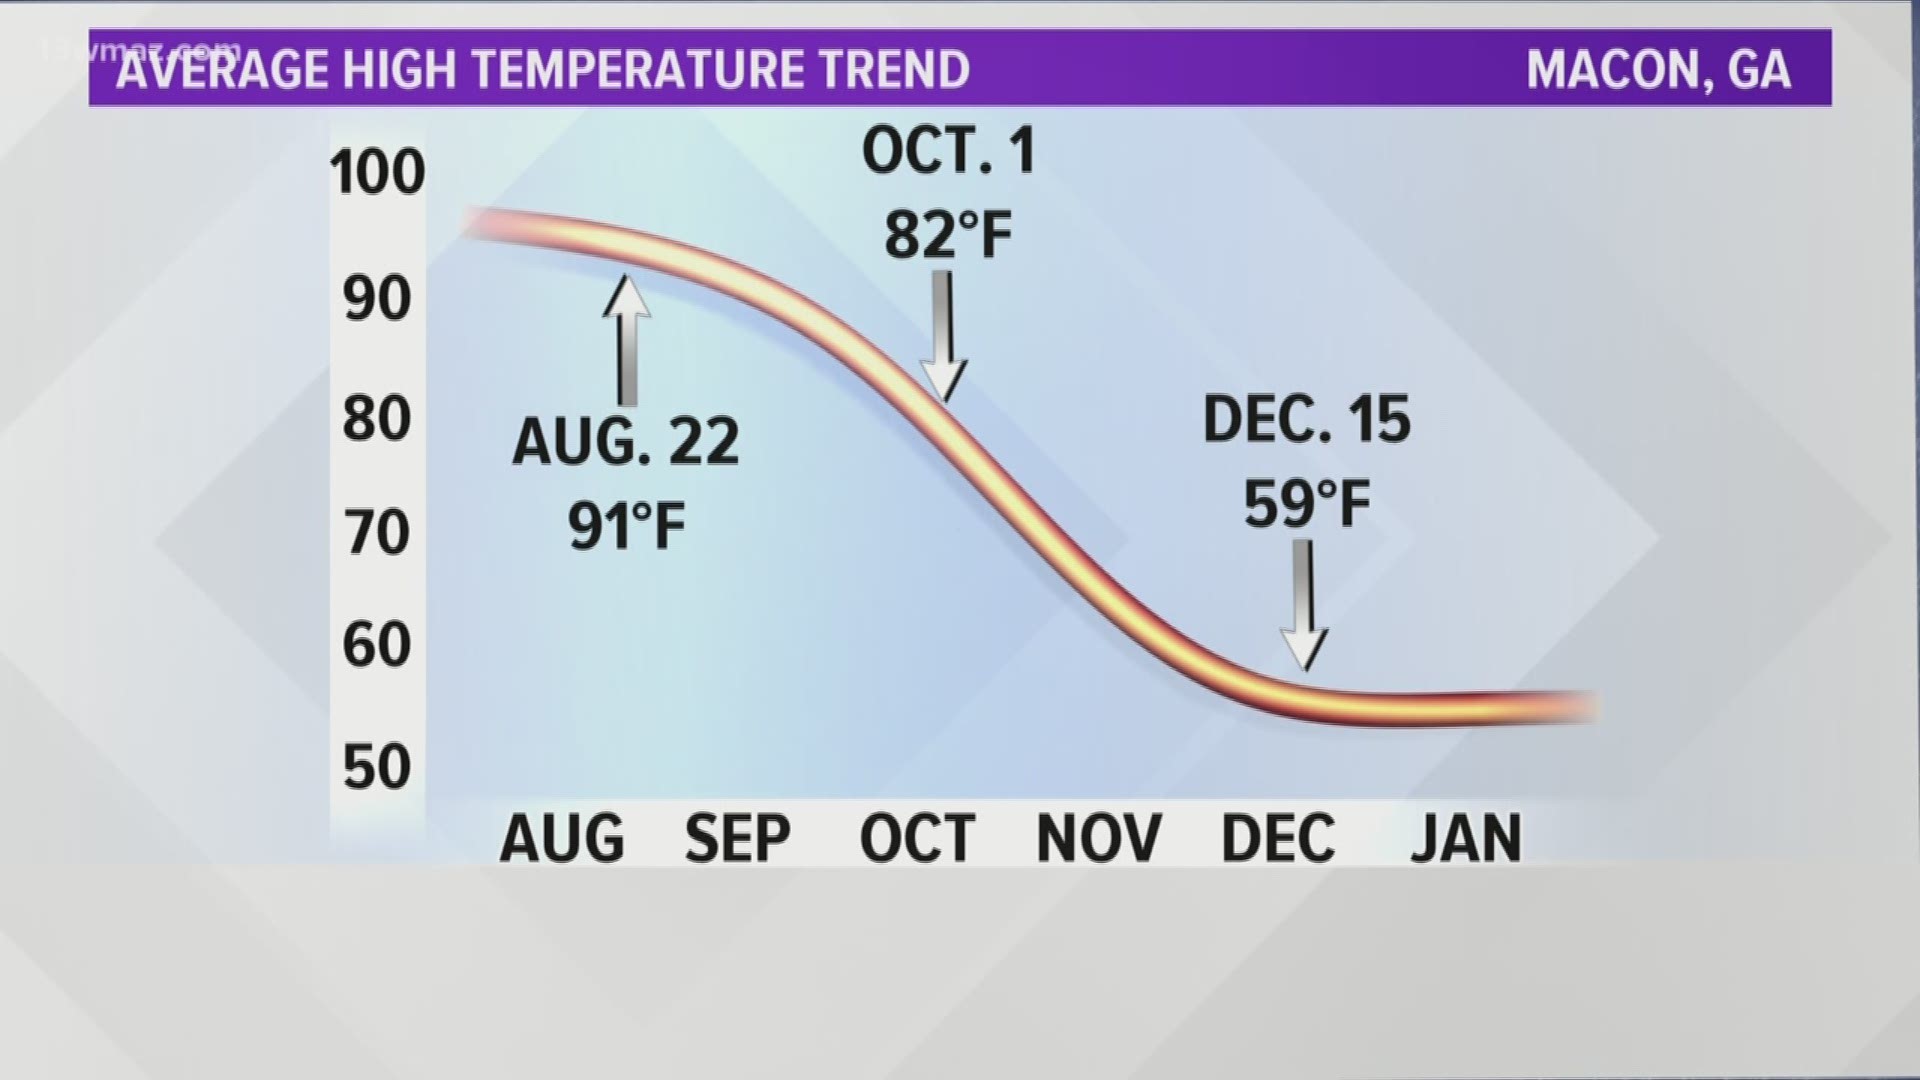 In a little over a month, the average high temperature in Macon will drop to the low 80s.